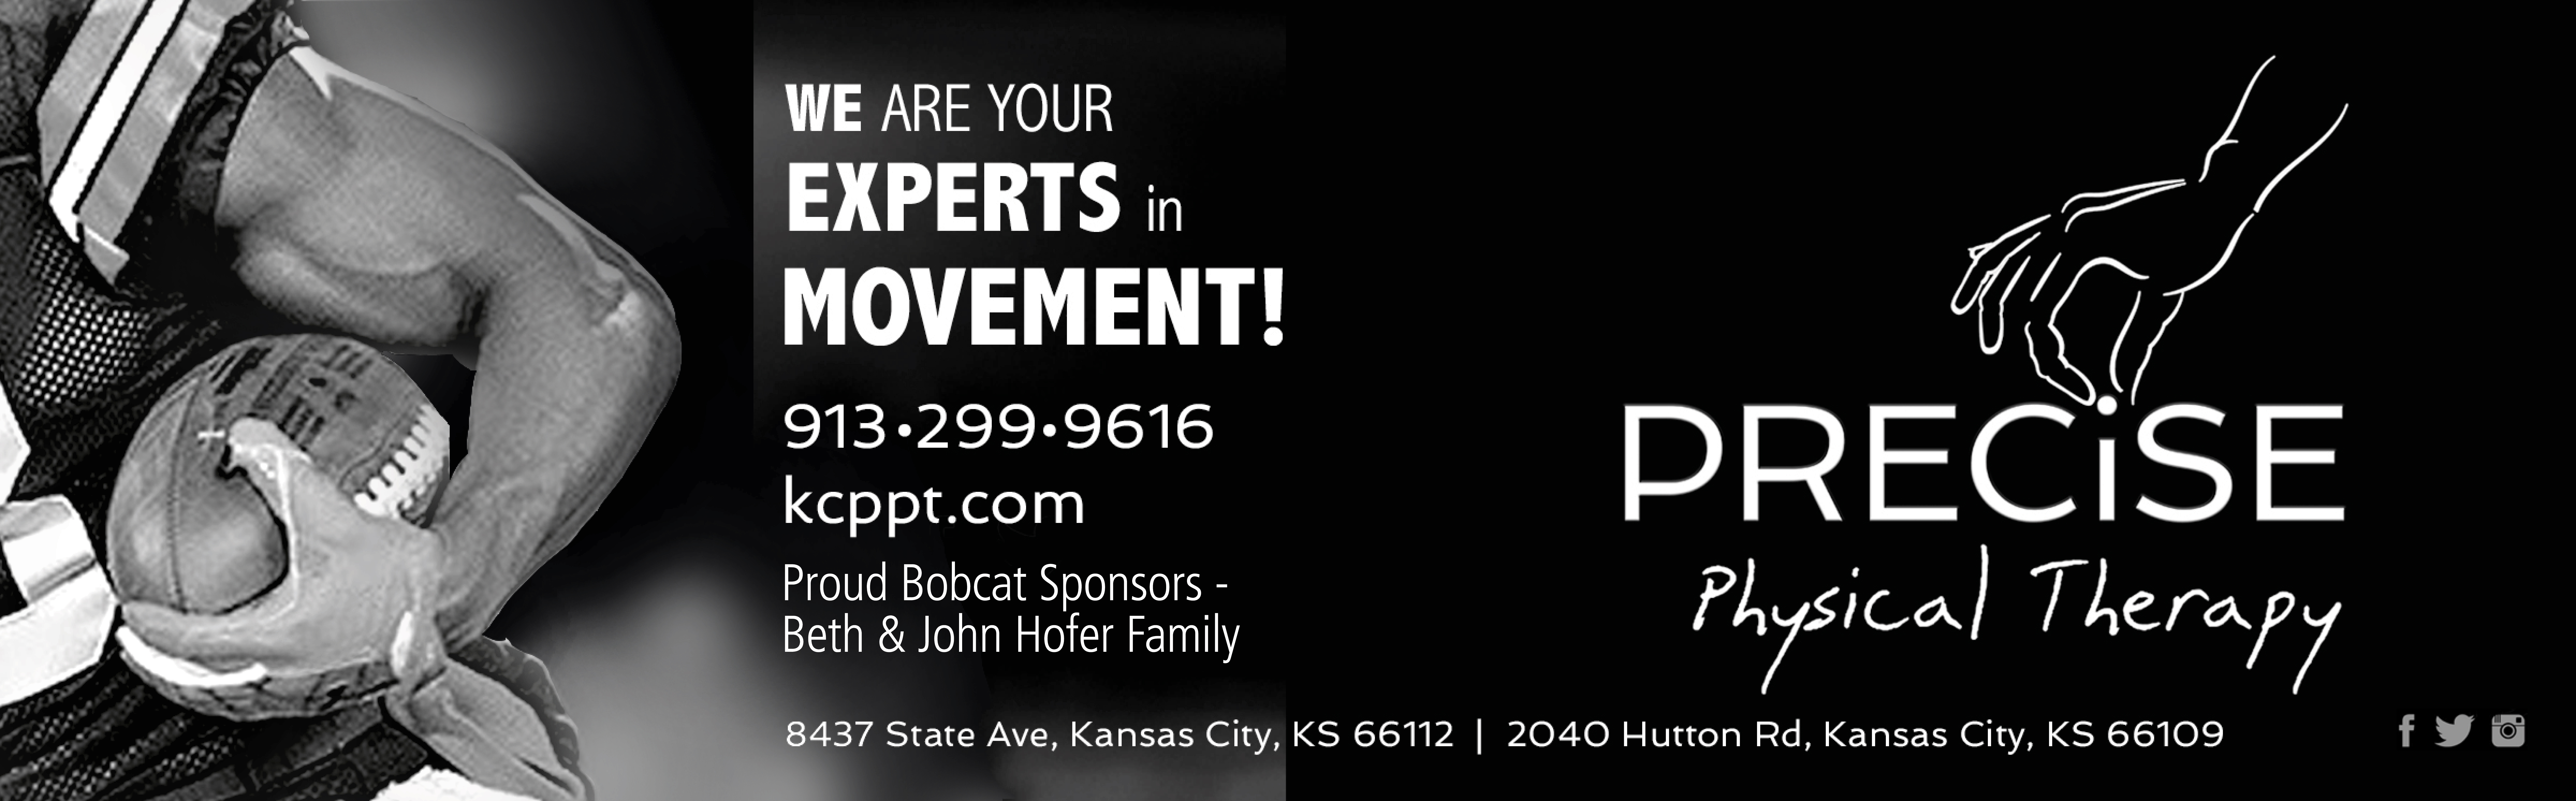 Precise Physical Therapy of Kansas City